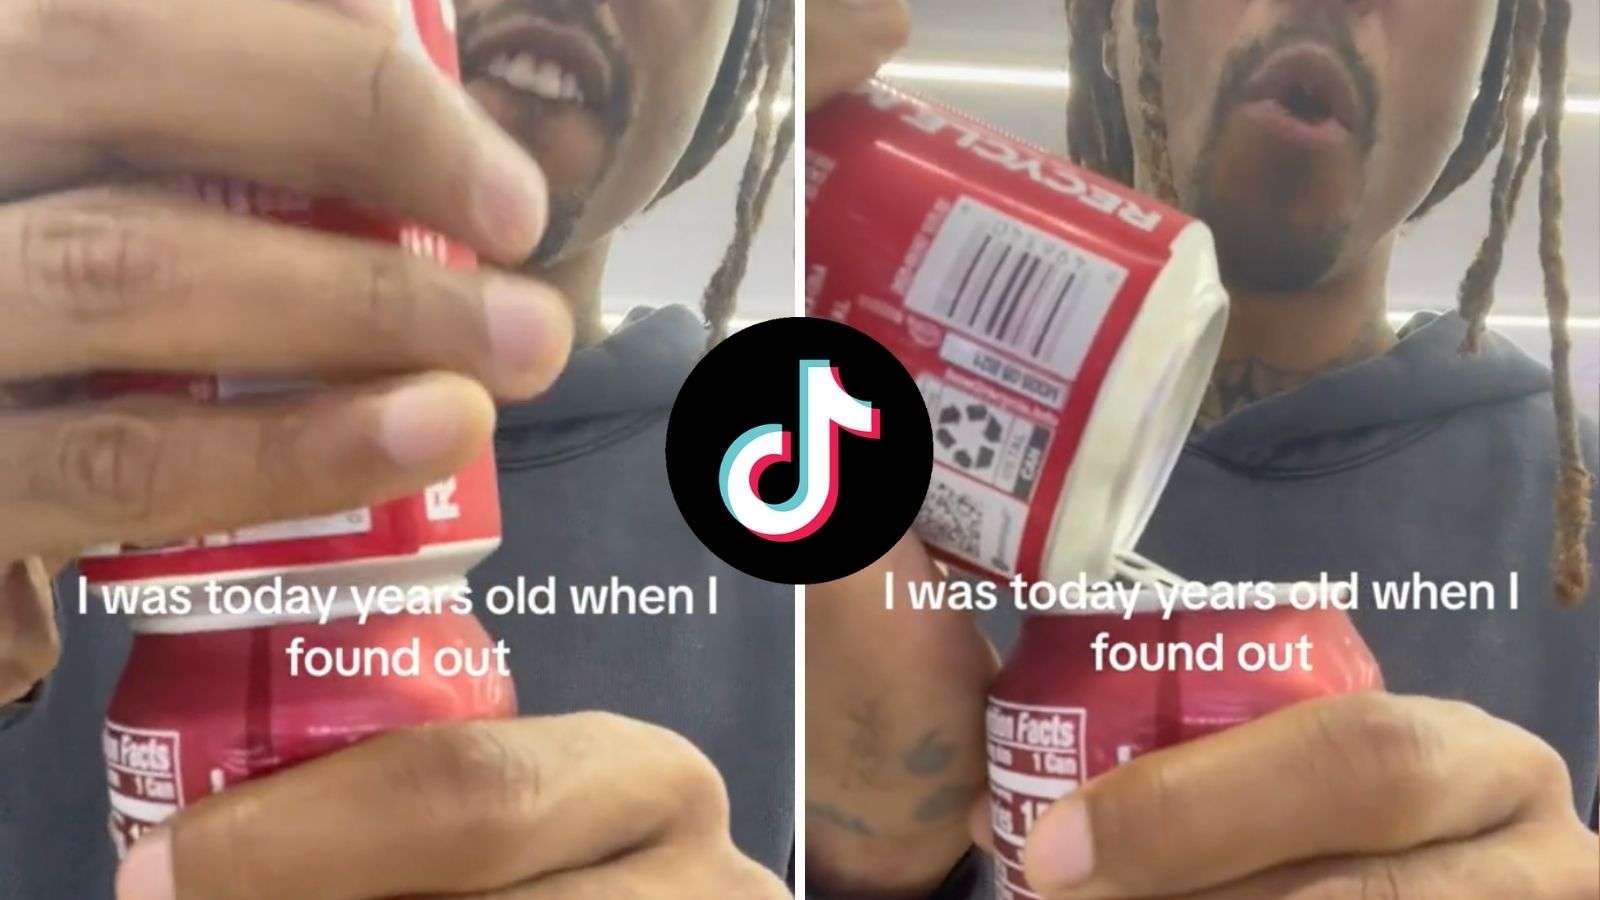 TikToker goes viral for showing the proper way to open soda cans